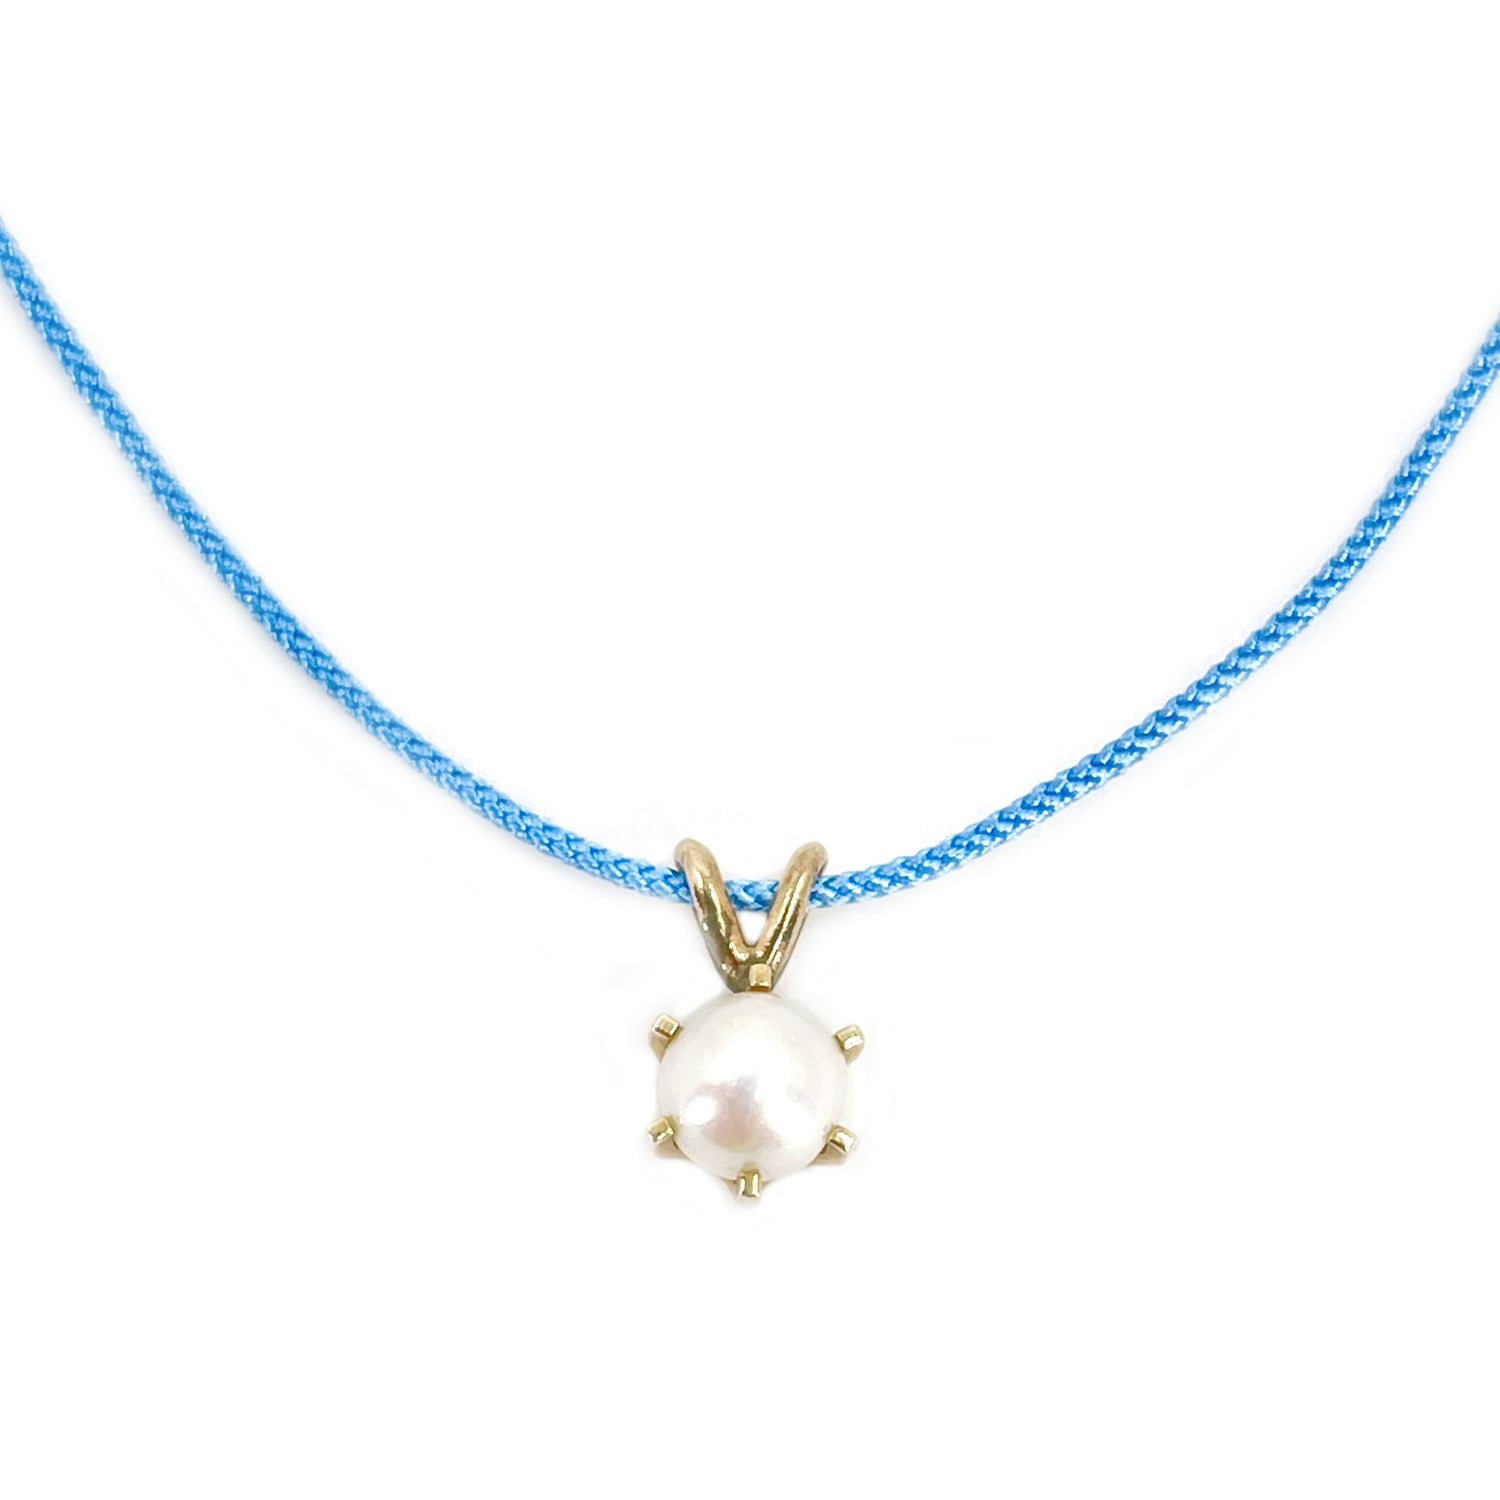 Kumihimo Braided Sky Blue Silk Vintage Akoya Saltwater Cultured Pearl Adjustable Necklace-14K Yellow Gold